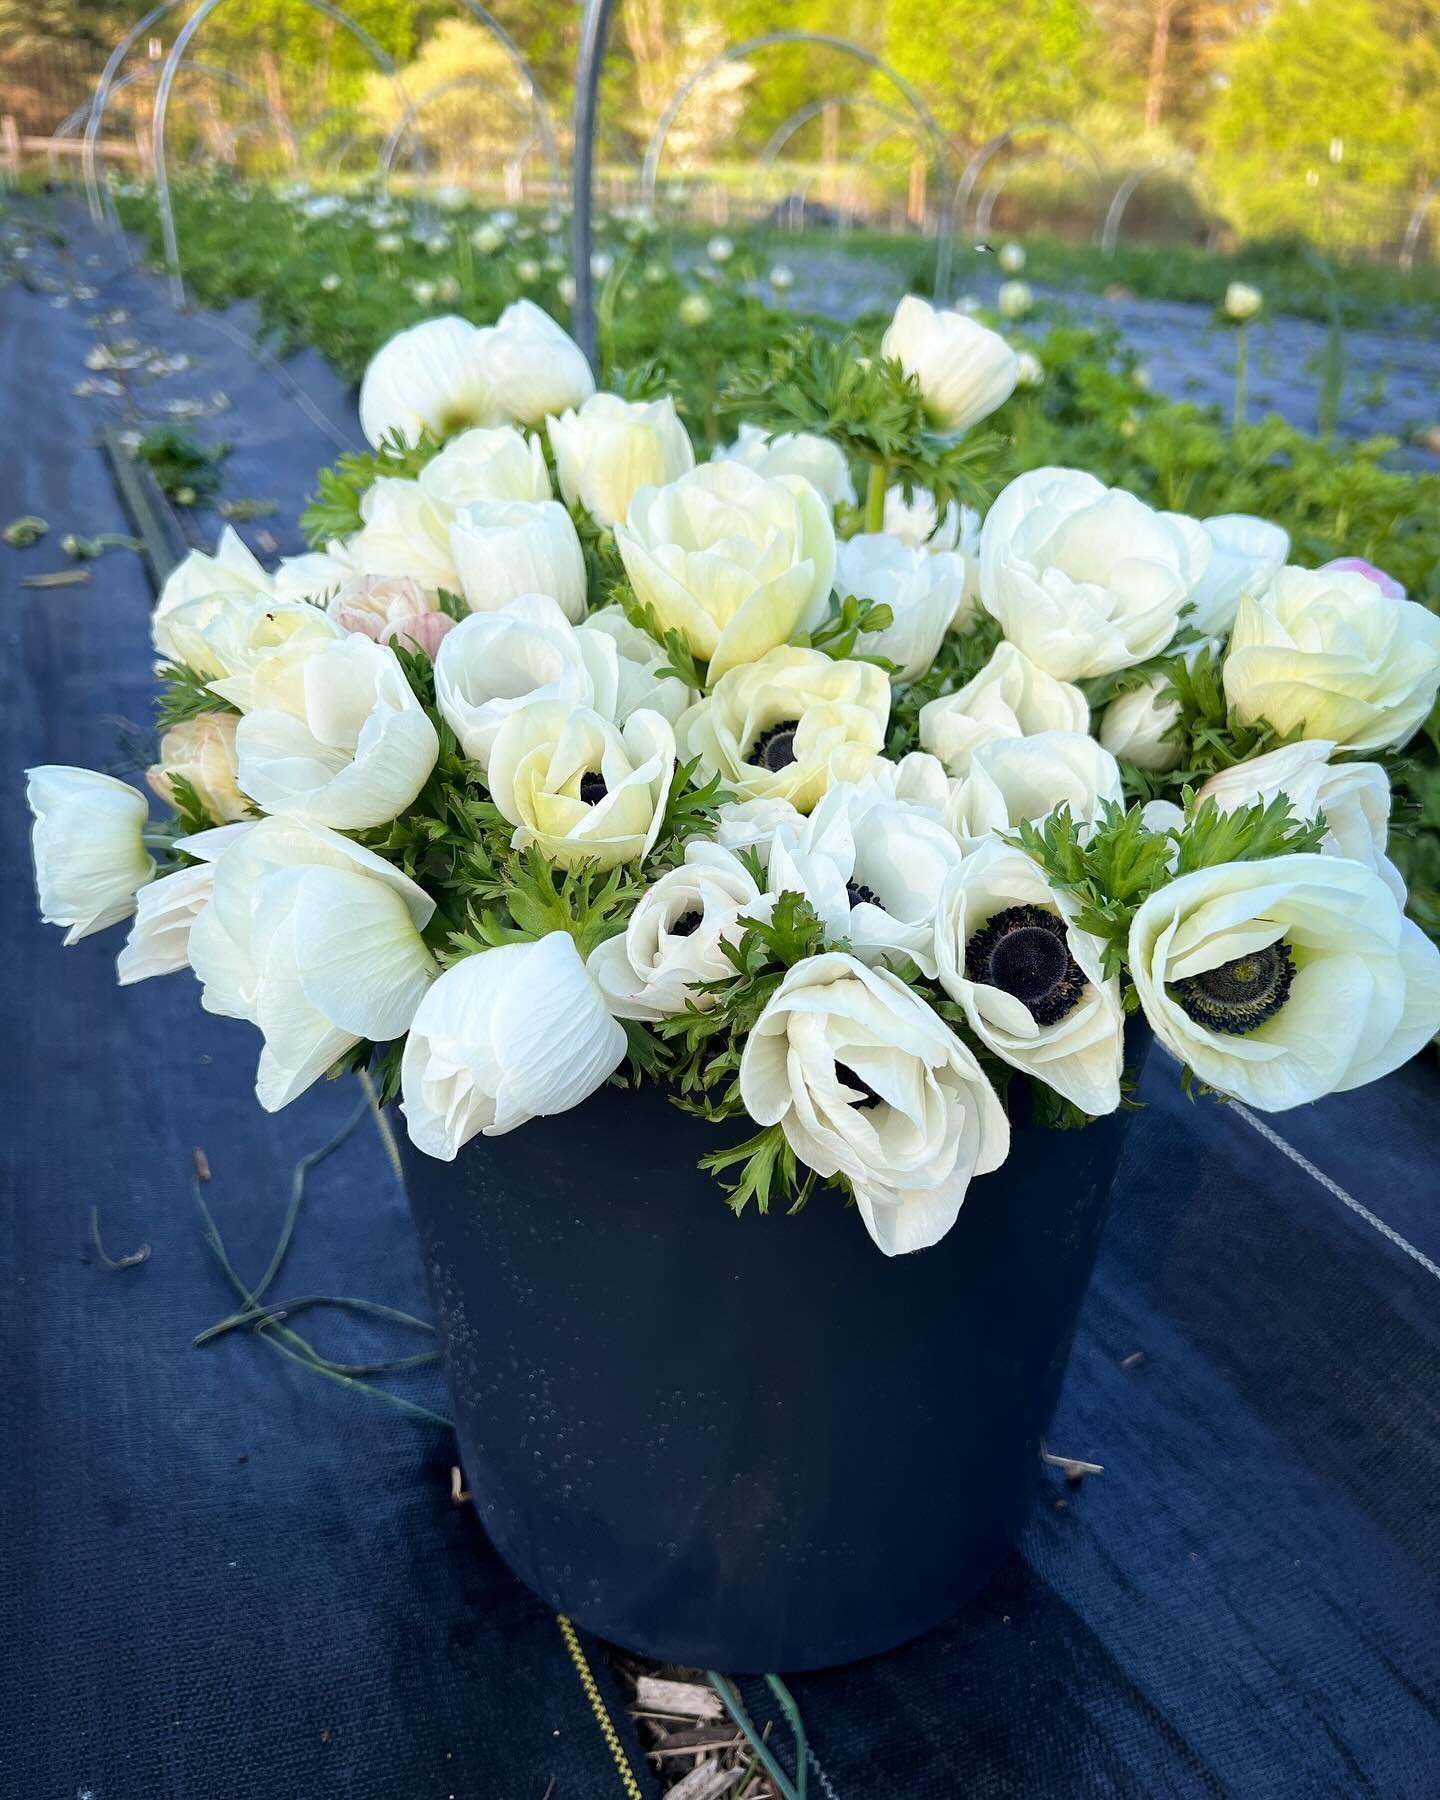 Our Mother&rsquo;s Day preorder is OPEN! We should even have ✨ranunculus✨ by then, as well as these gorgeous anemones. Beautiful, elegant bouquets for your mom, wife, best friend, sister, grandmother, or daughter: moms deserve special flowers. They&r